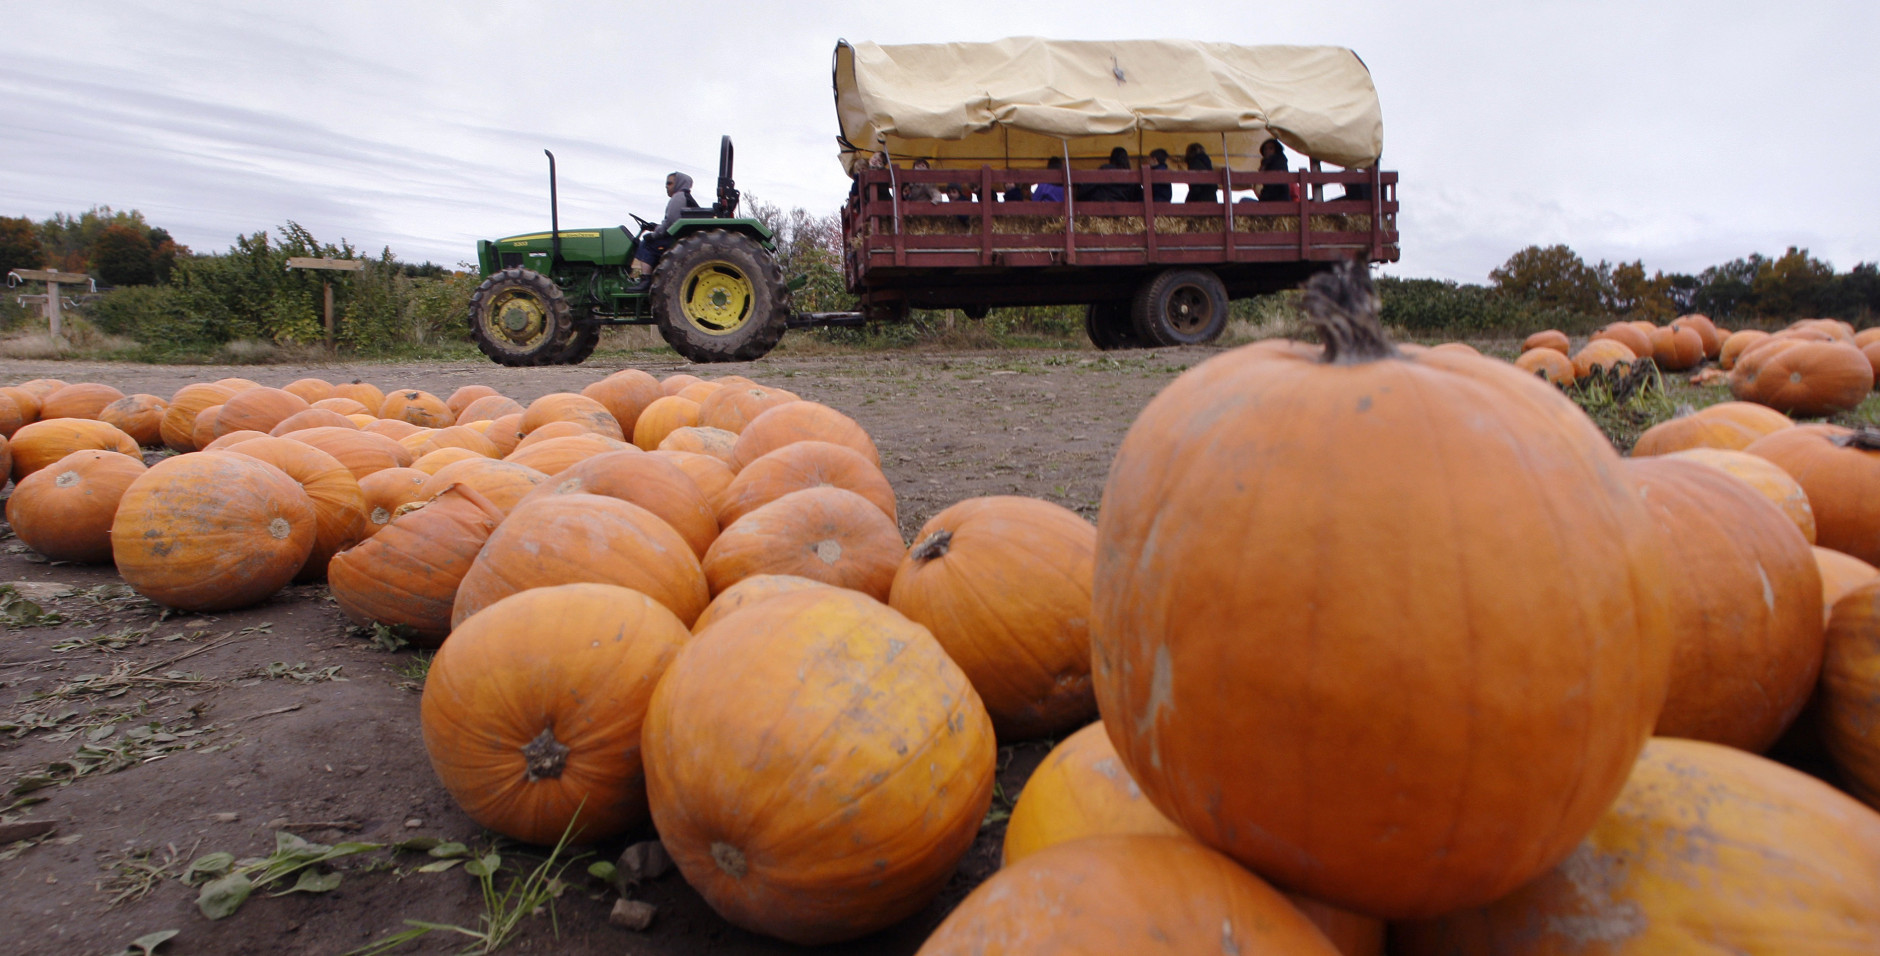 A tractor pulls a group of children on a hay ride through the pumpkin patch at Smolak Farms in North Andover, Mass., Thursday, Oct. 15, 2009. (AP Photo/Charles Krupa)